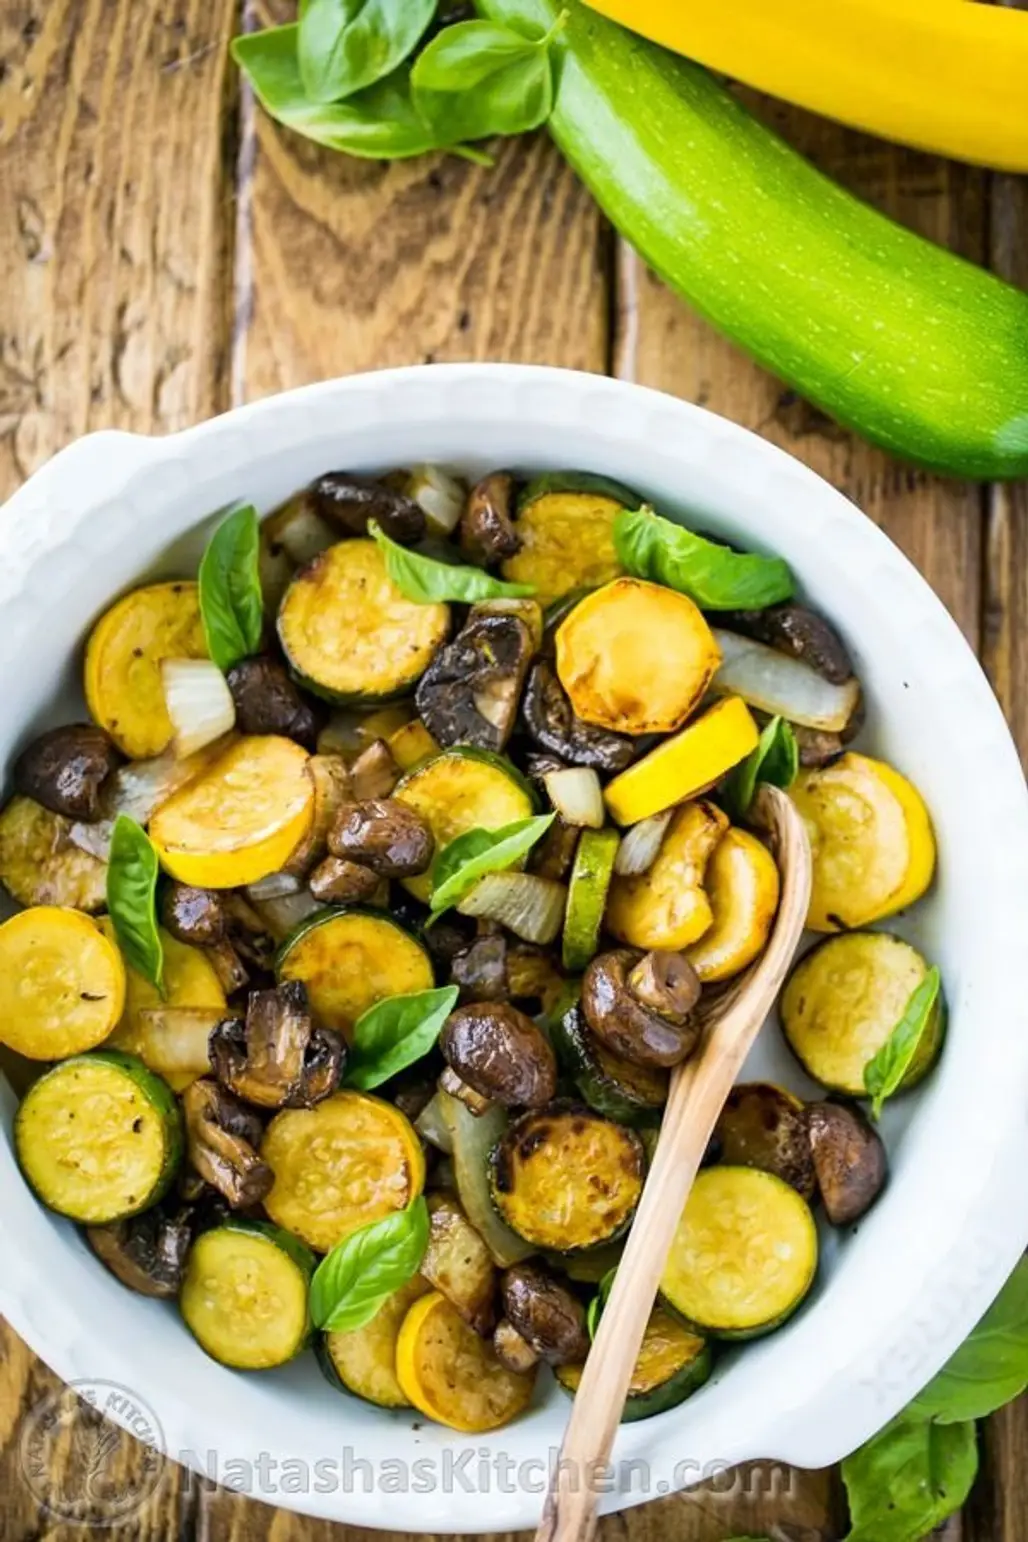 Grilled Zucchini and Mushrooms